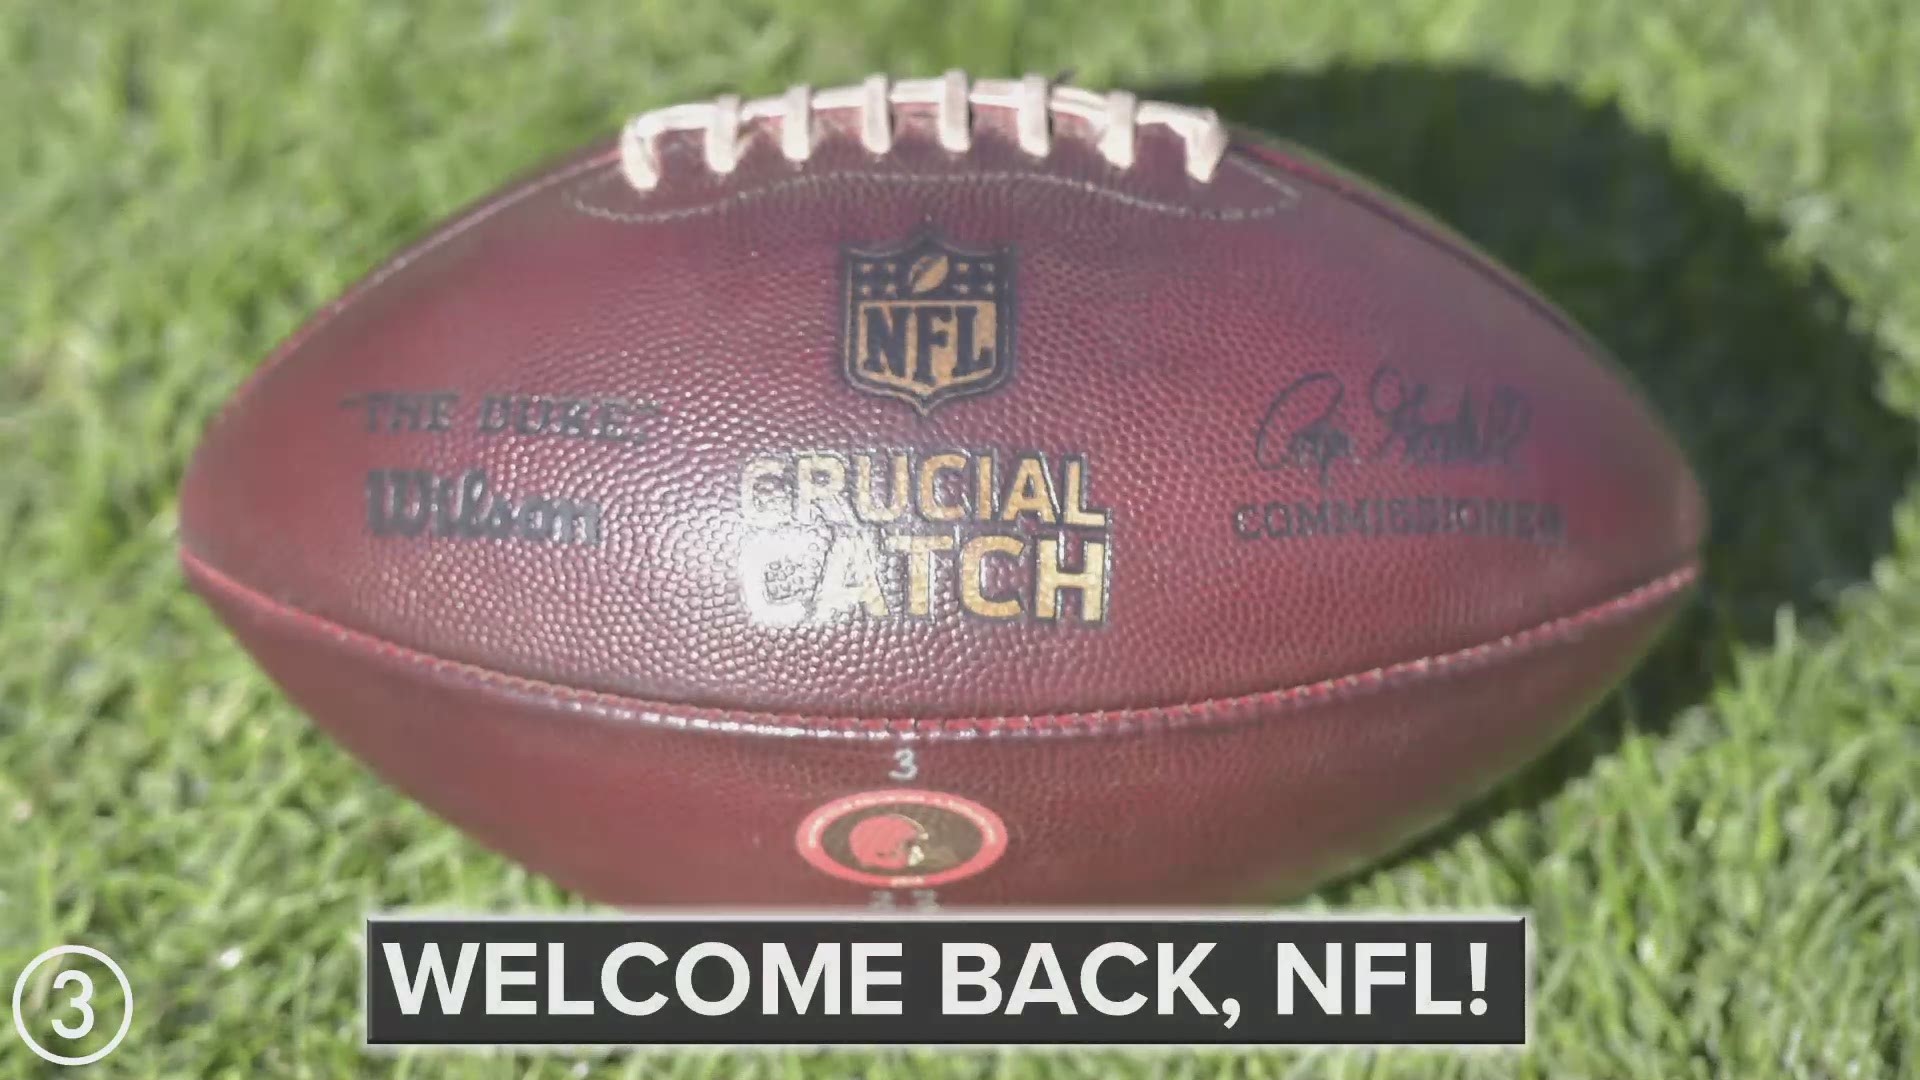 The NFL is back!  You can watch tonight's game between the Chiefs and Texans right here on WKYC.  Kickoff is at 8:20 p.m.